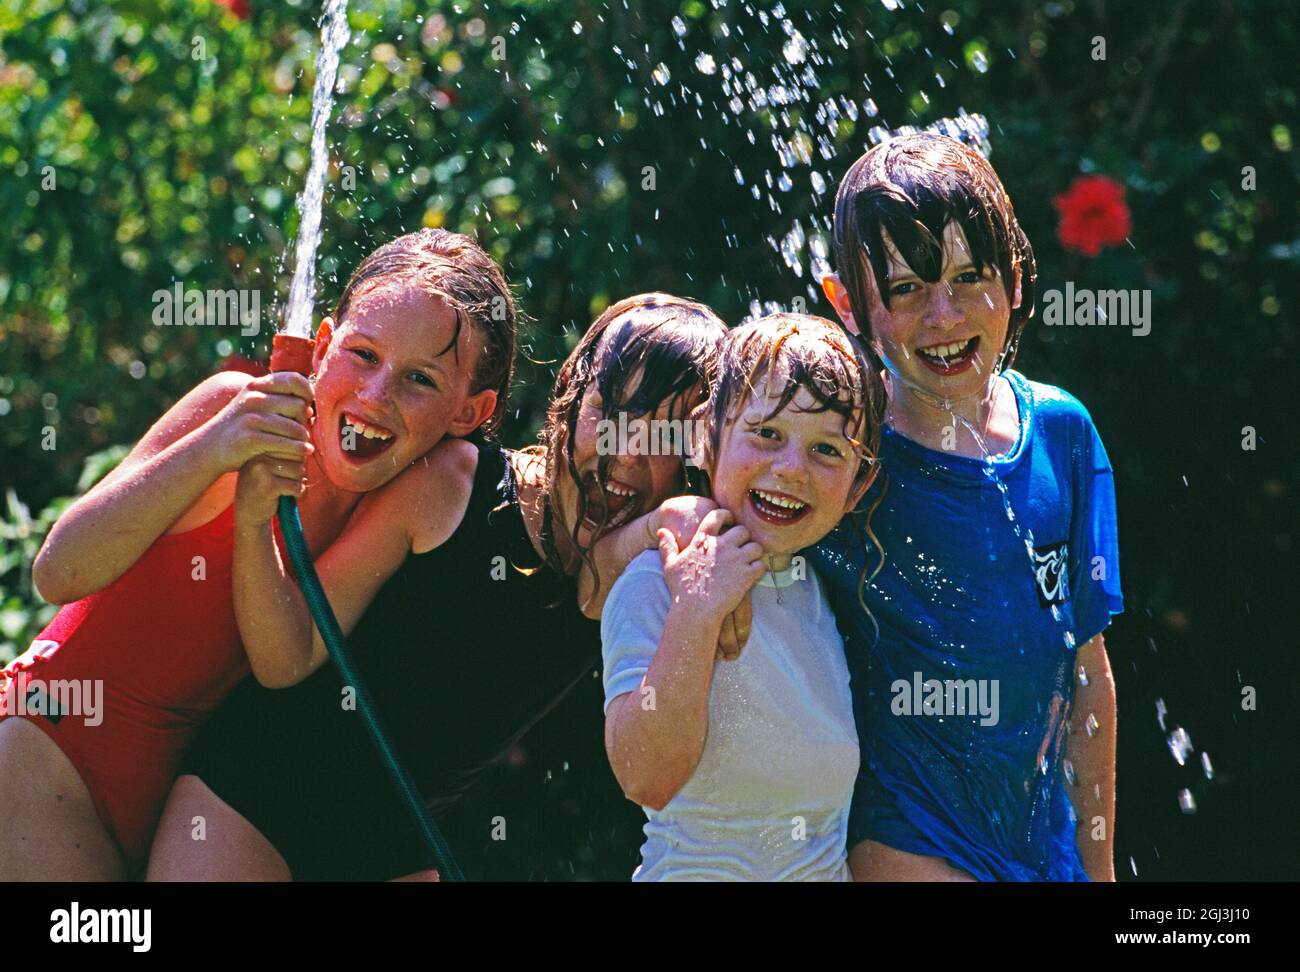 Group of children playing outdoors with water hose. Stock Photo